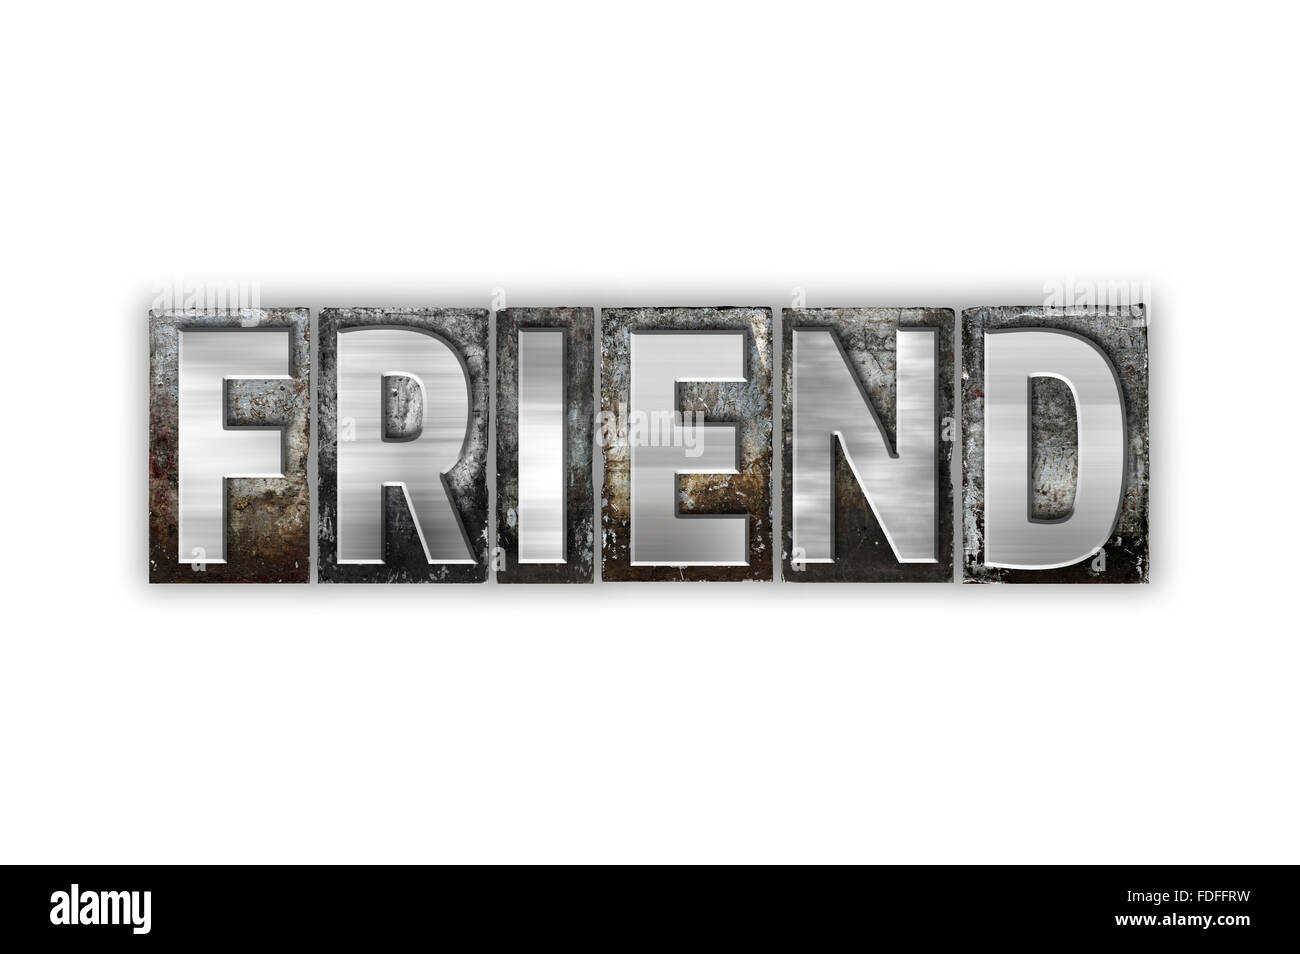 The word "Friend" written in vintage metal letterpress type isolated on a white background. Stock Photo